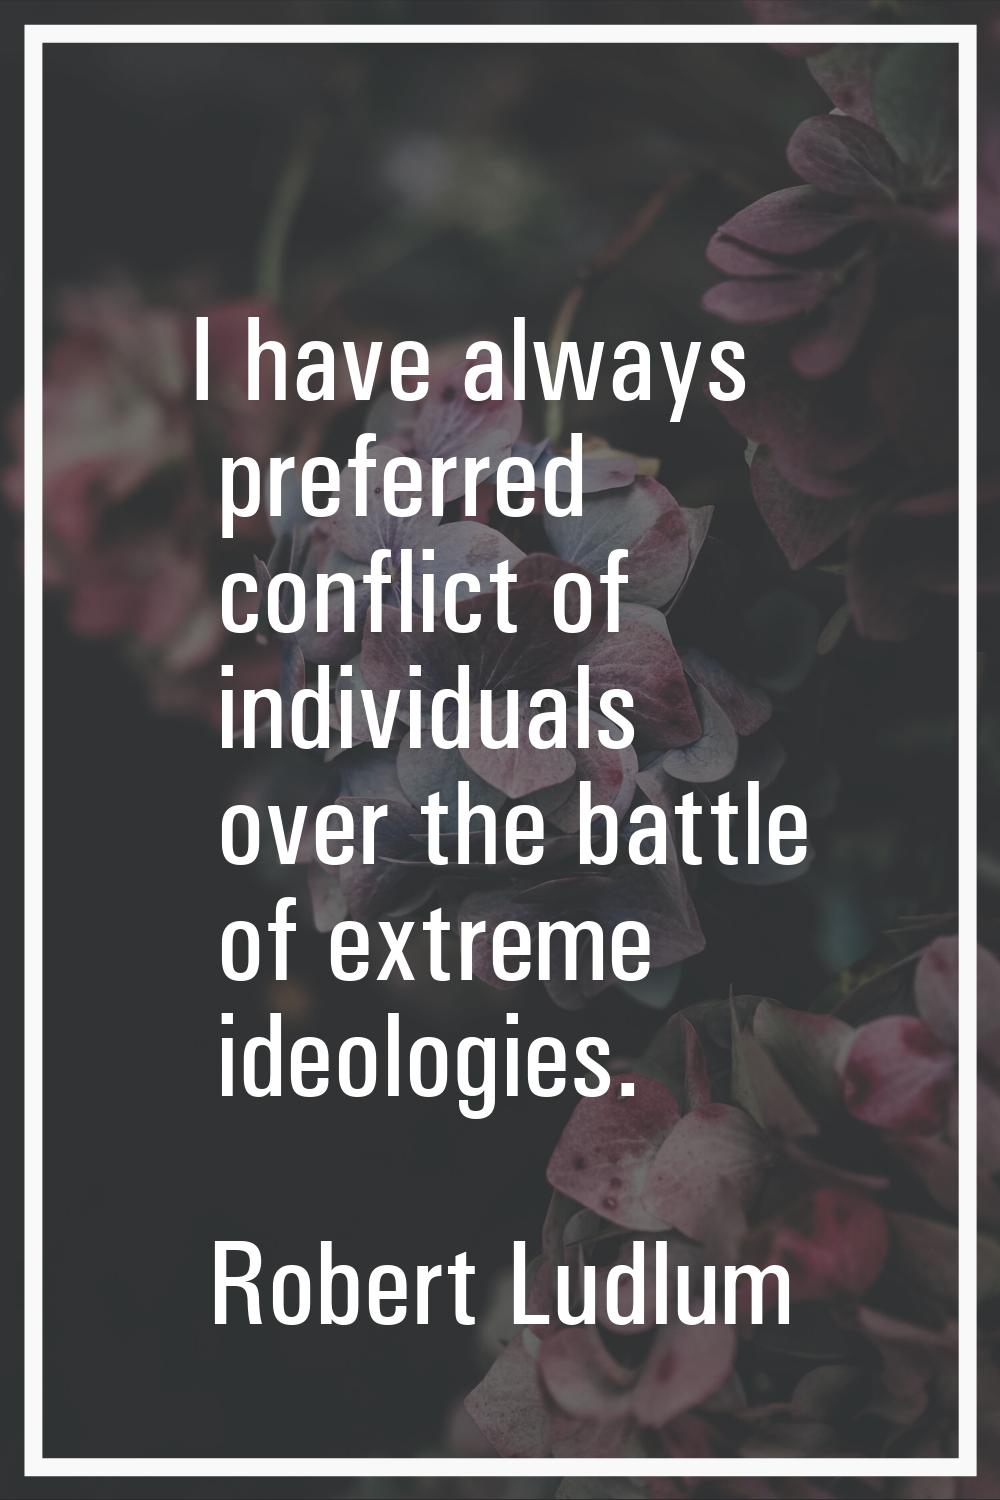 I have always preferred conflict of individuals over the battle of extreme ideologies.